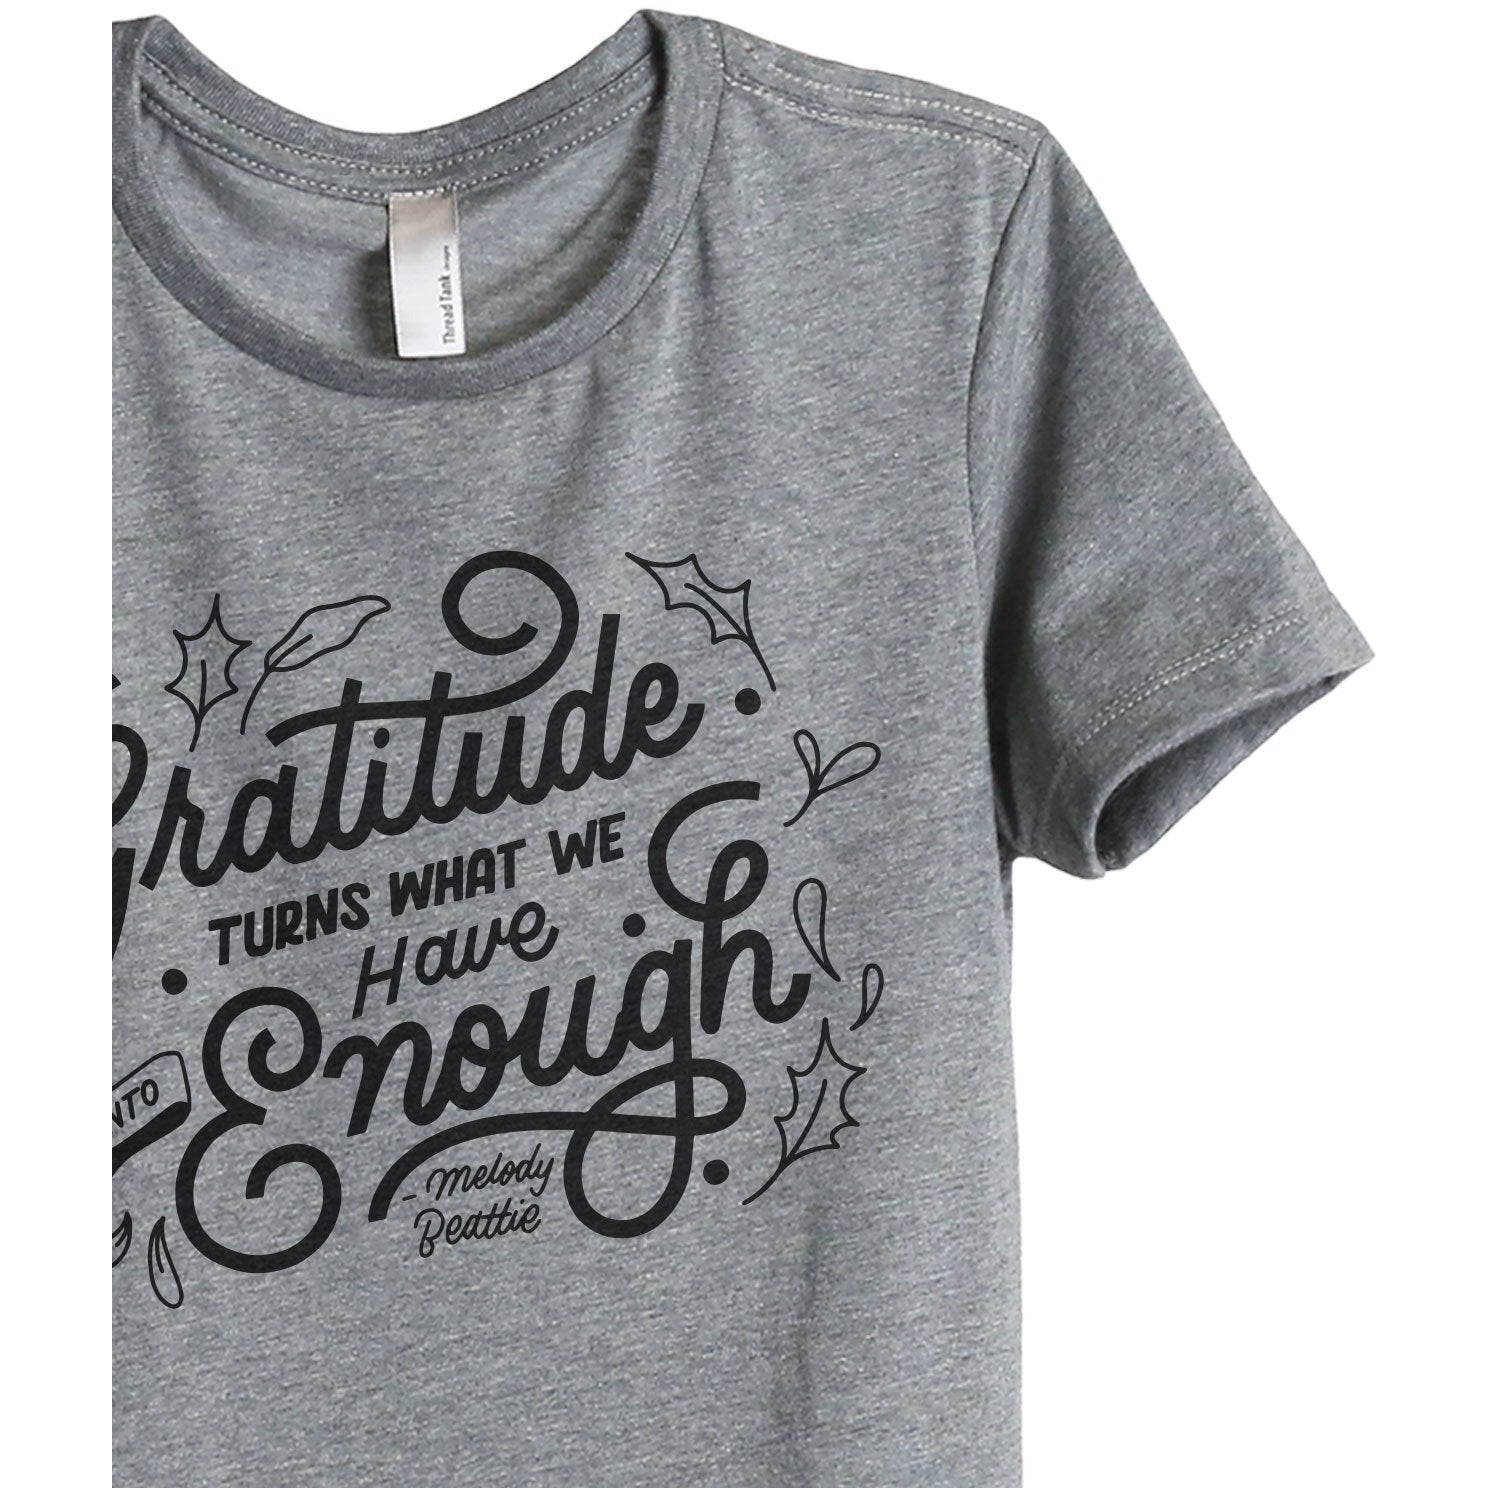 Gratitude Turns What We Have Into Enough Women's Relaxed Crewneck T-Shirt Top Tee Heather Grey Zoom Details
